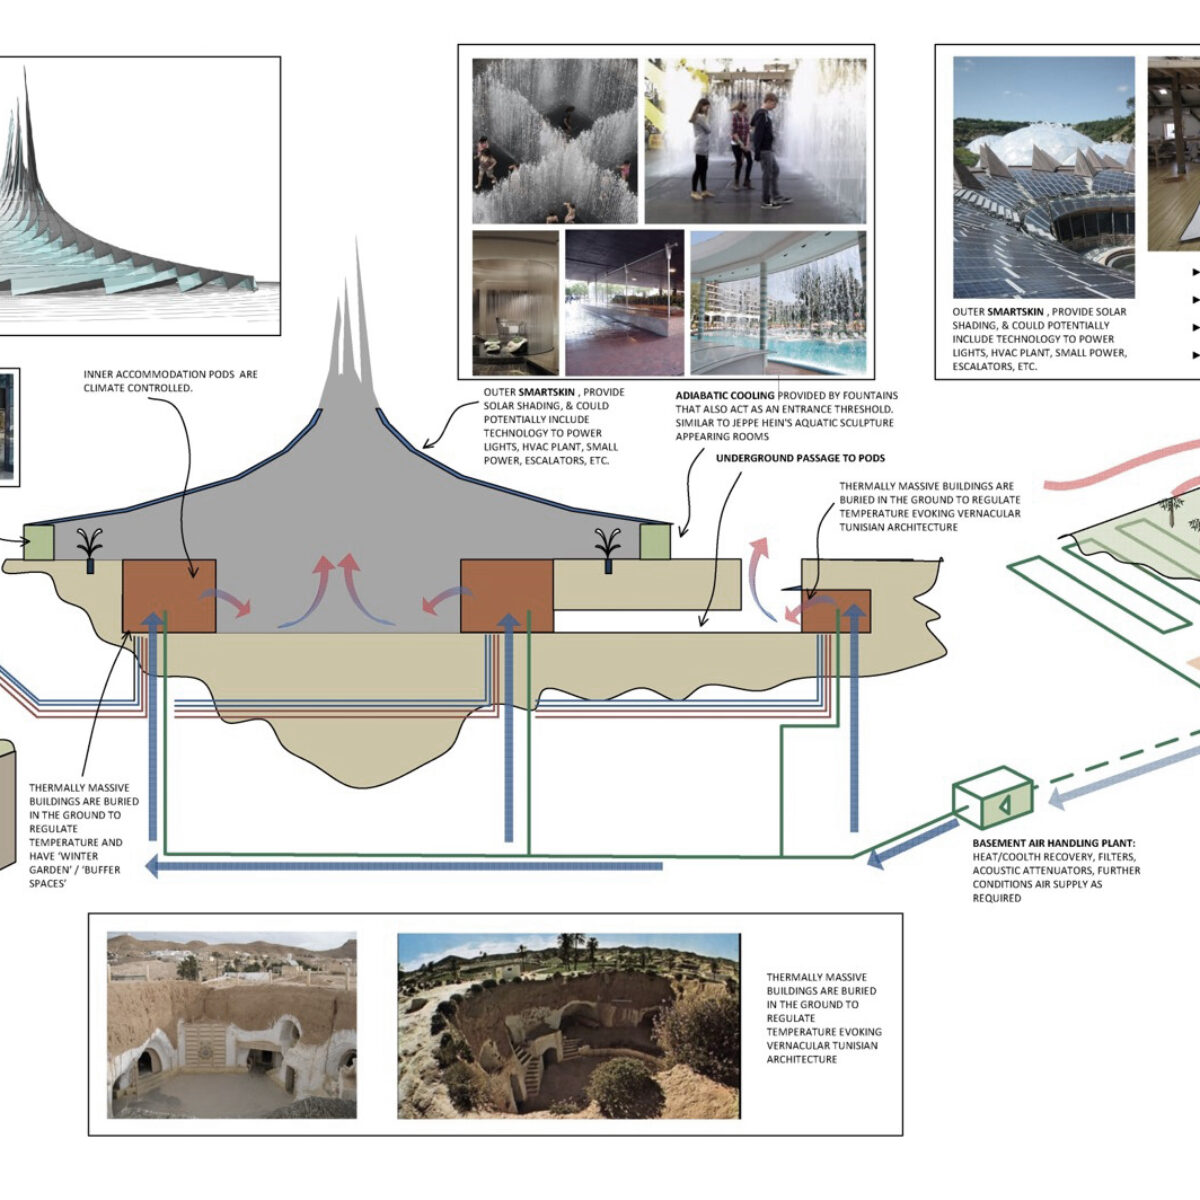 Eco-Resort: Environemental Strategy, Solar Chimney and water cooling techinques